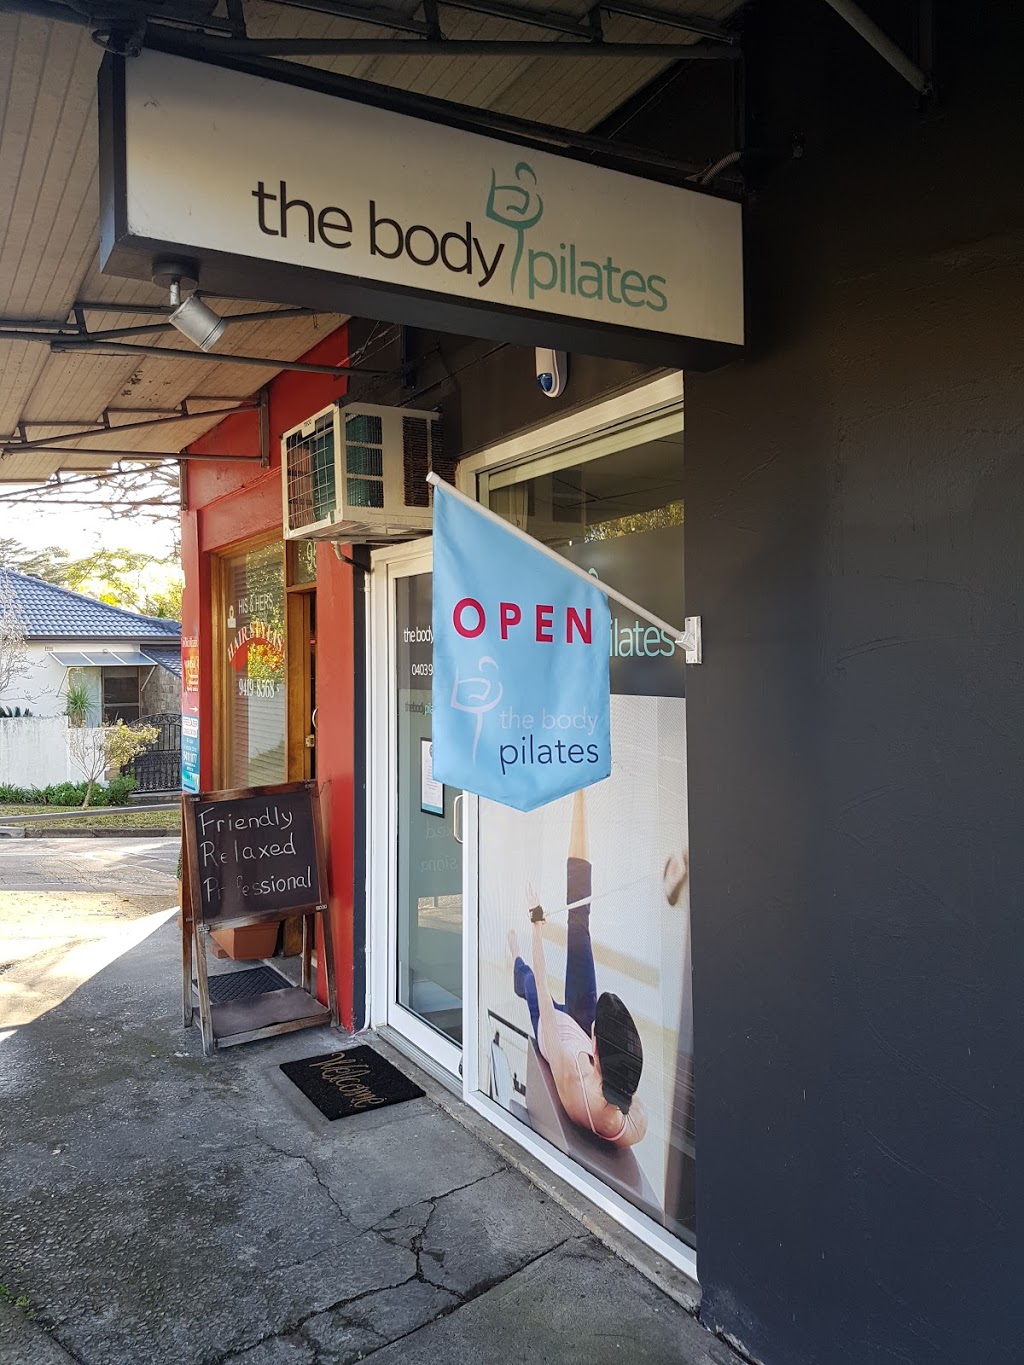 The Body Pilates | gym | 95B Fullers Rd, Chatswood NSW 2067, Australia | 0403987837 OR +61 403 987 837